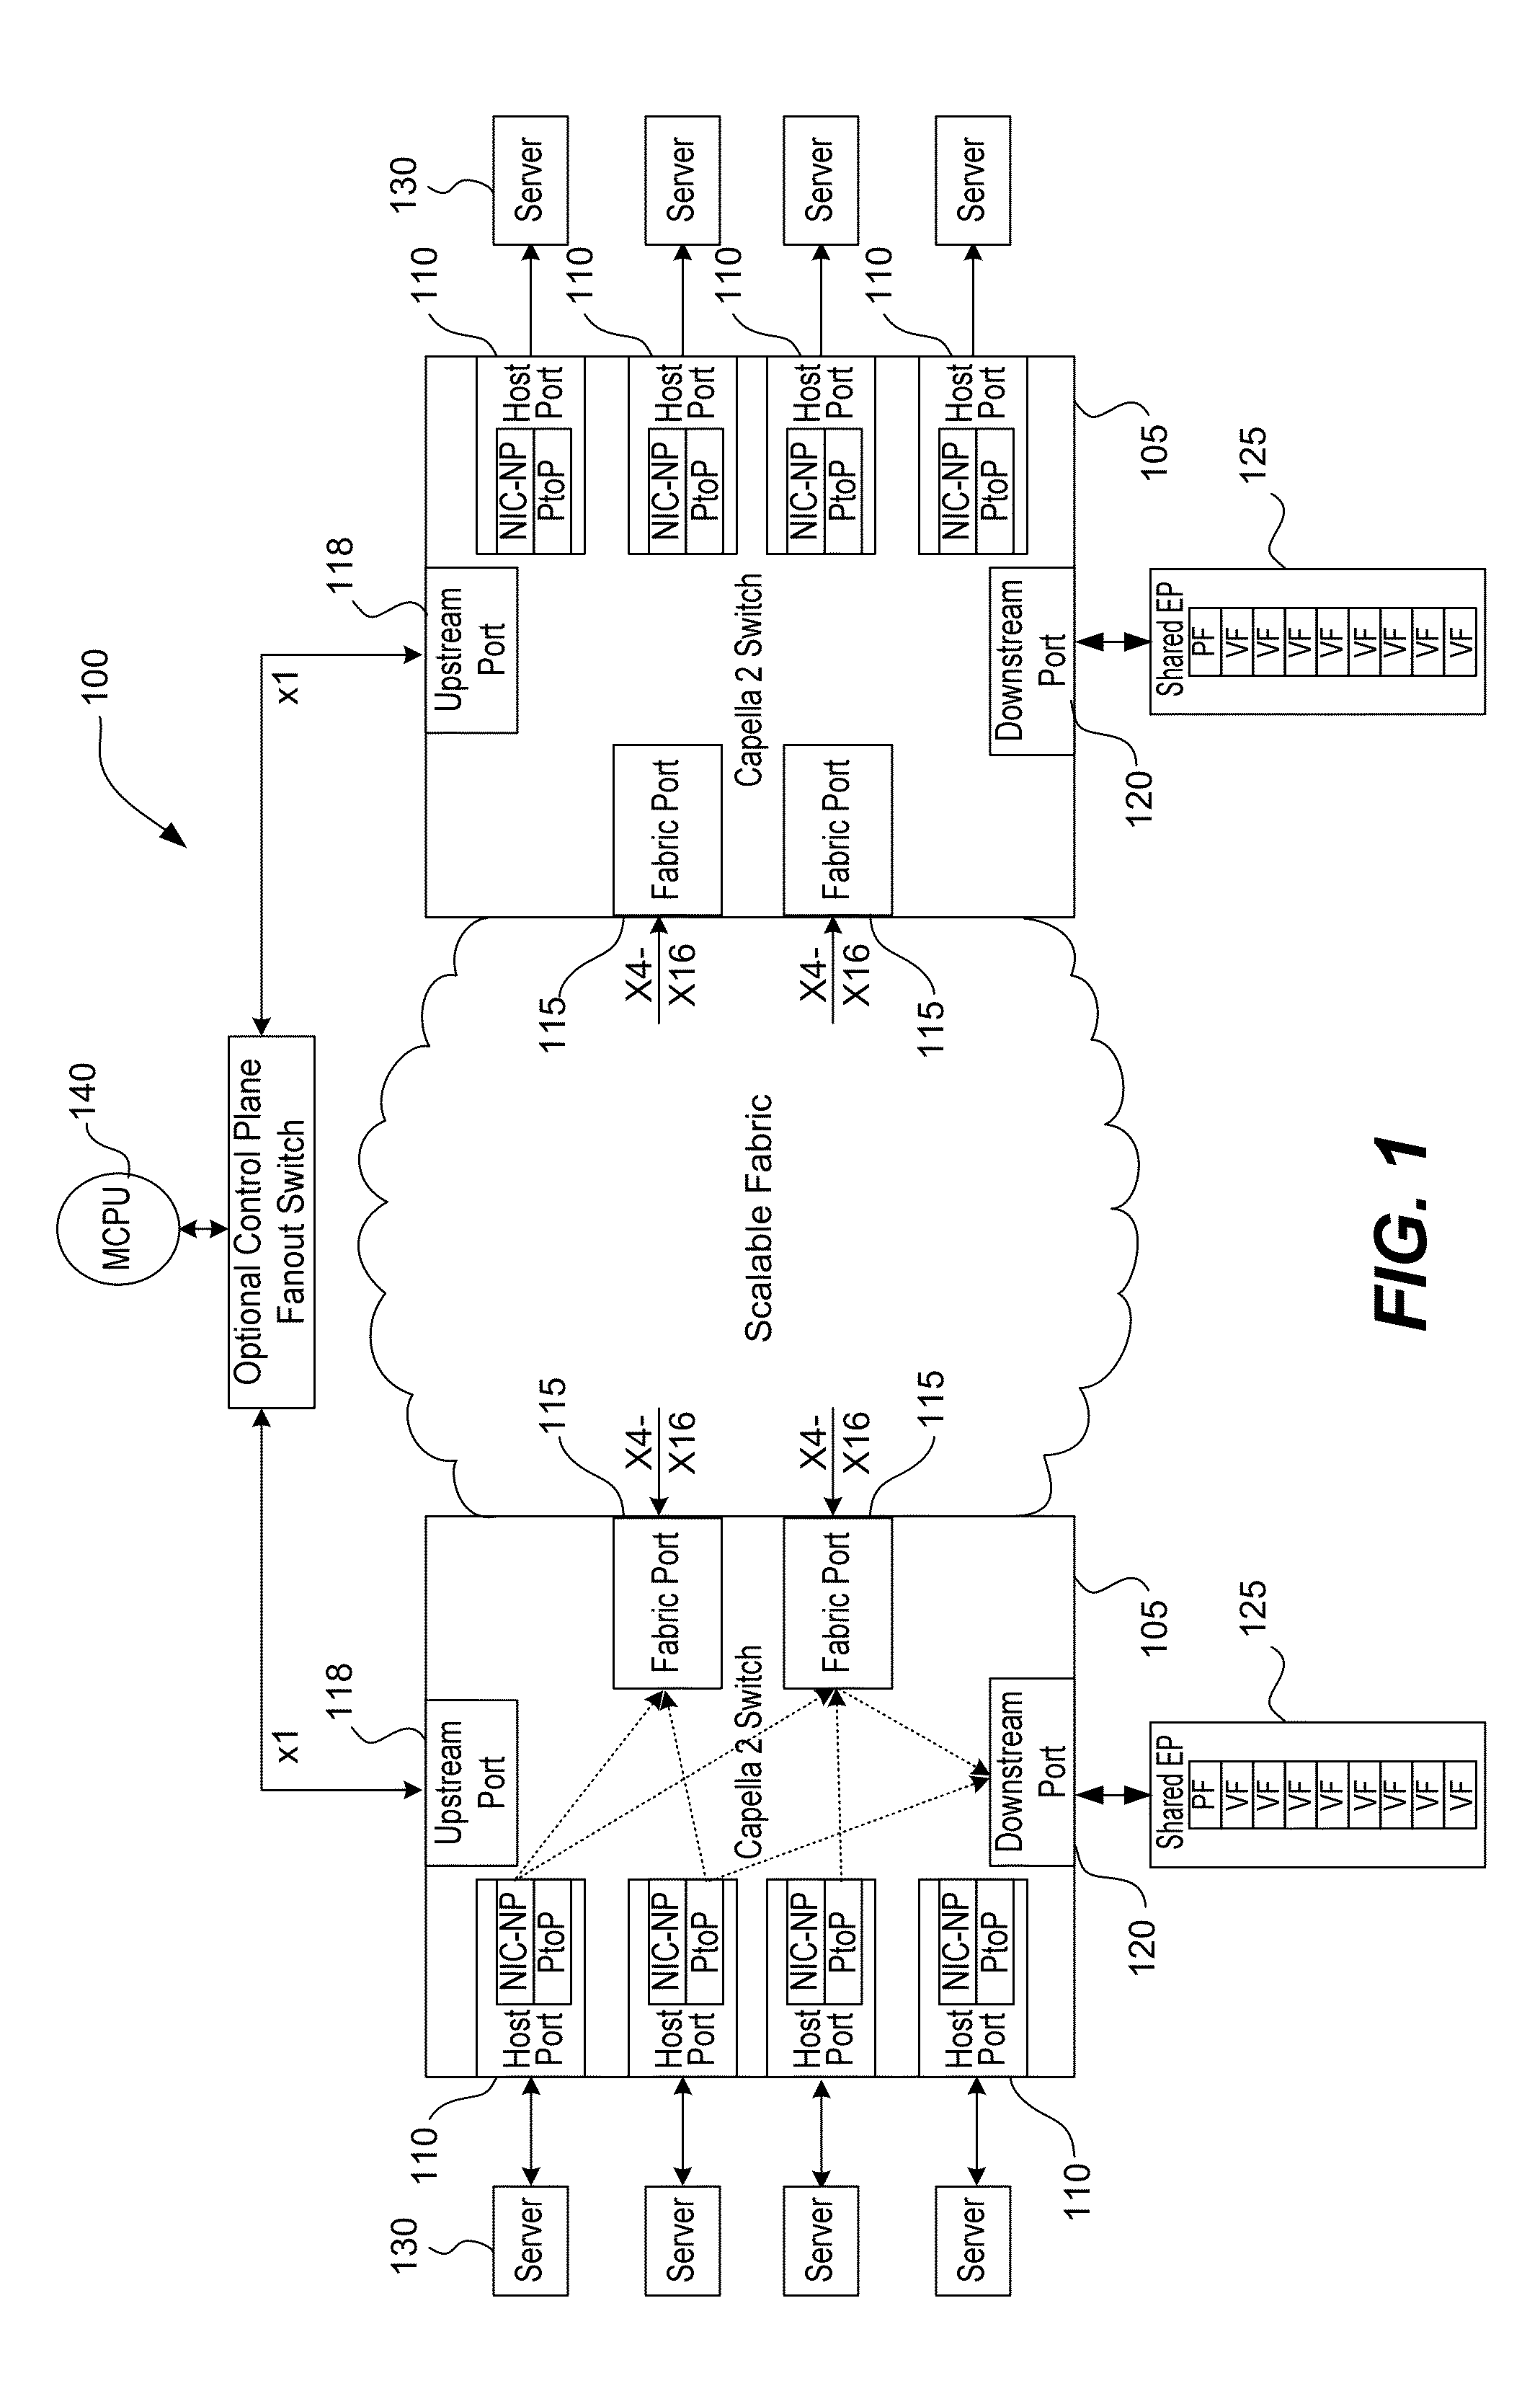 Unordered multi-path routing in a pcie express fabric environment